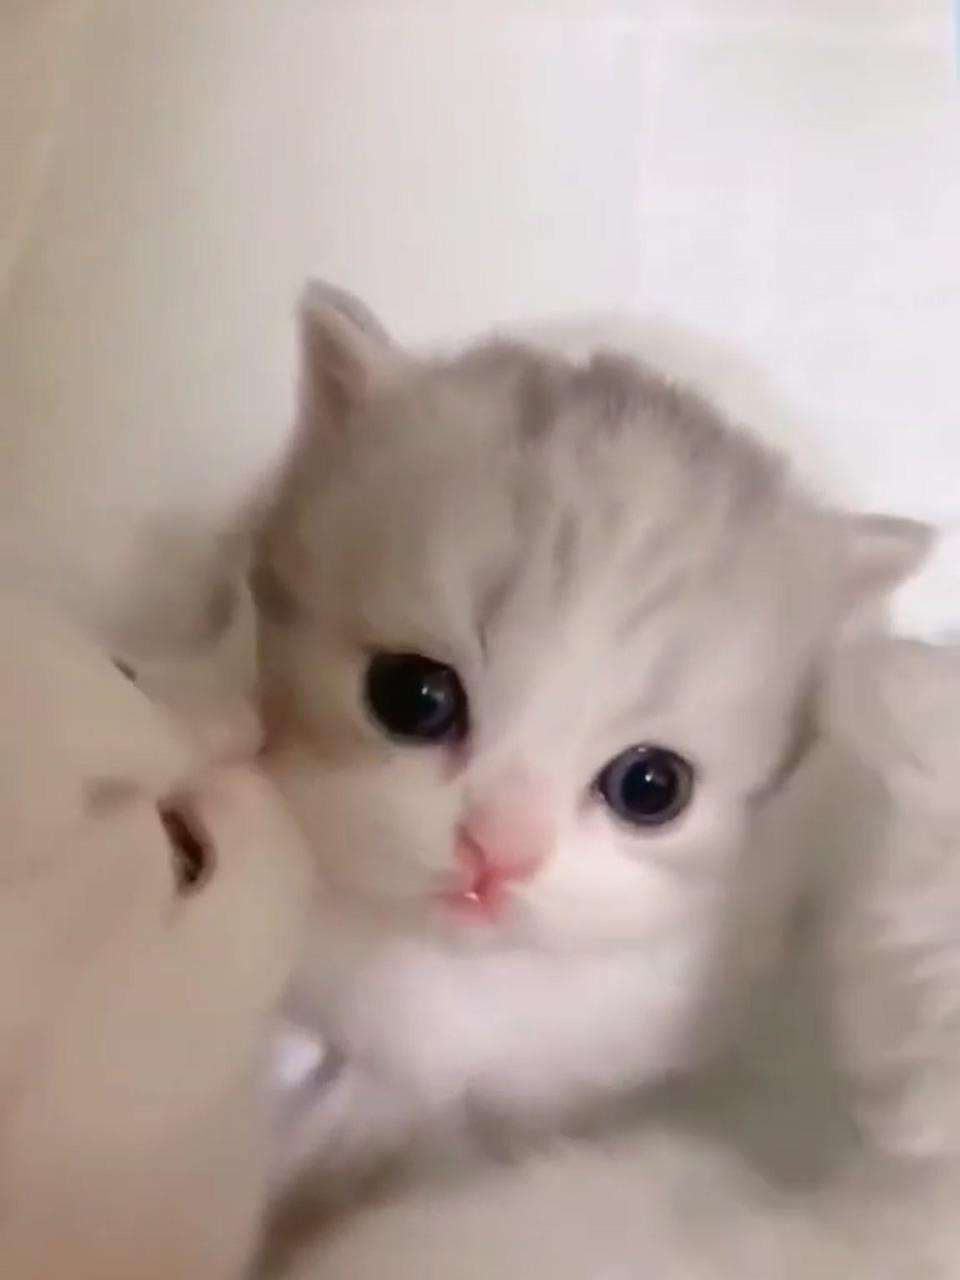 "a cute stupid kitten must be shared with the cutest people of course"; kittens cutest baby